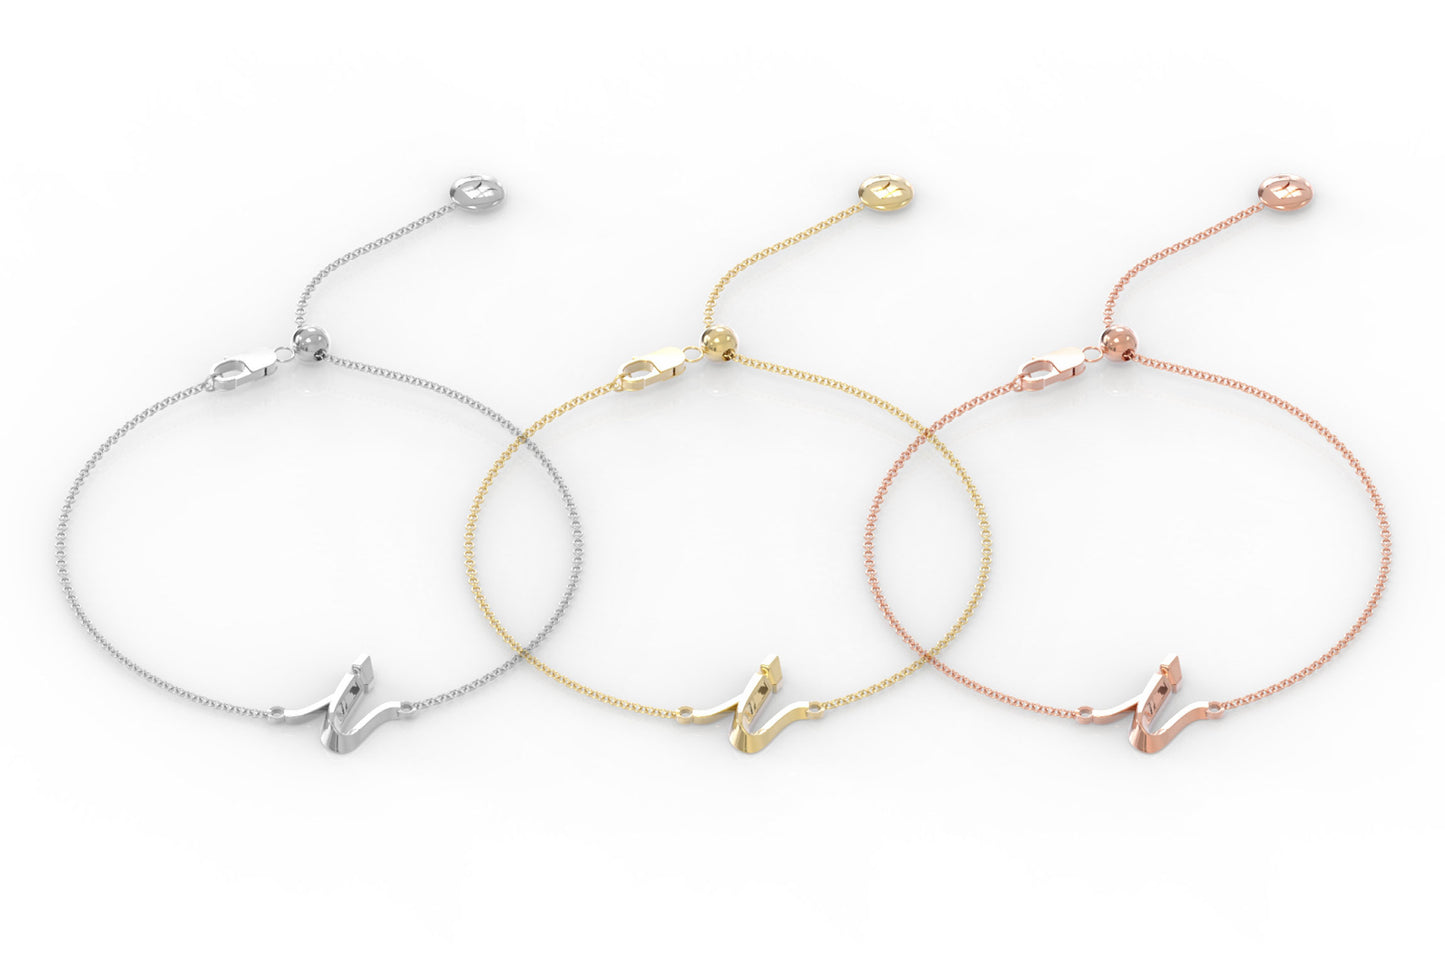 The Love Collect - "I" Bracelet